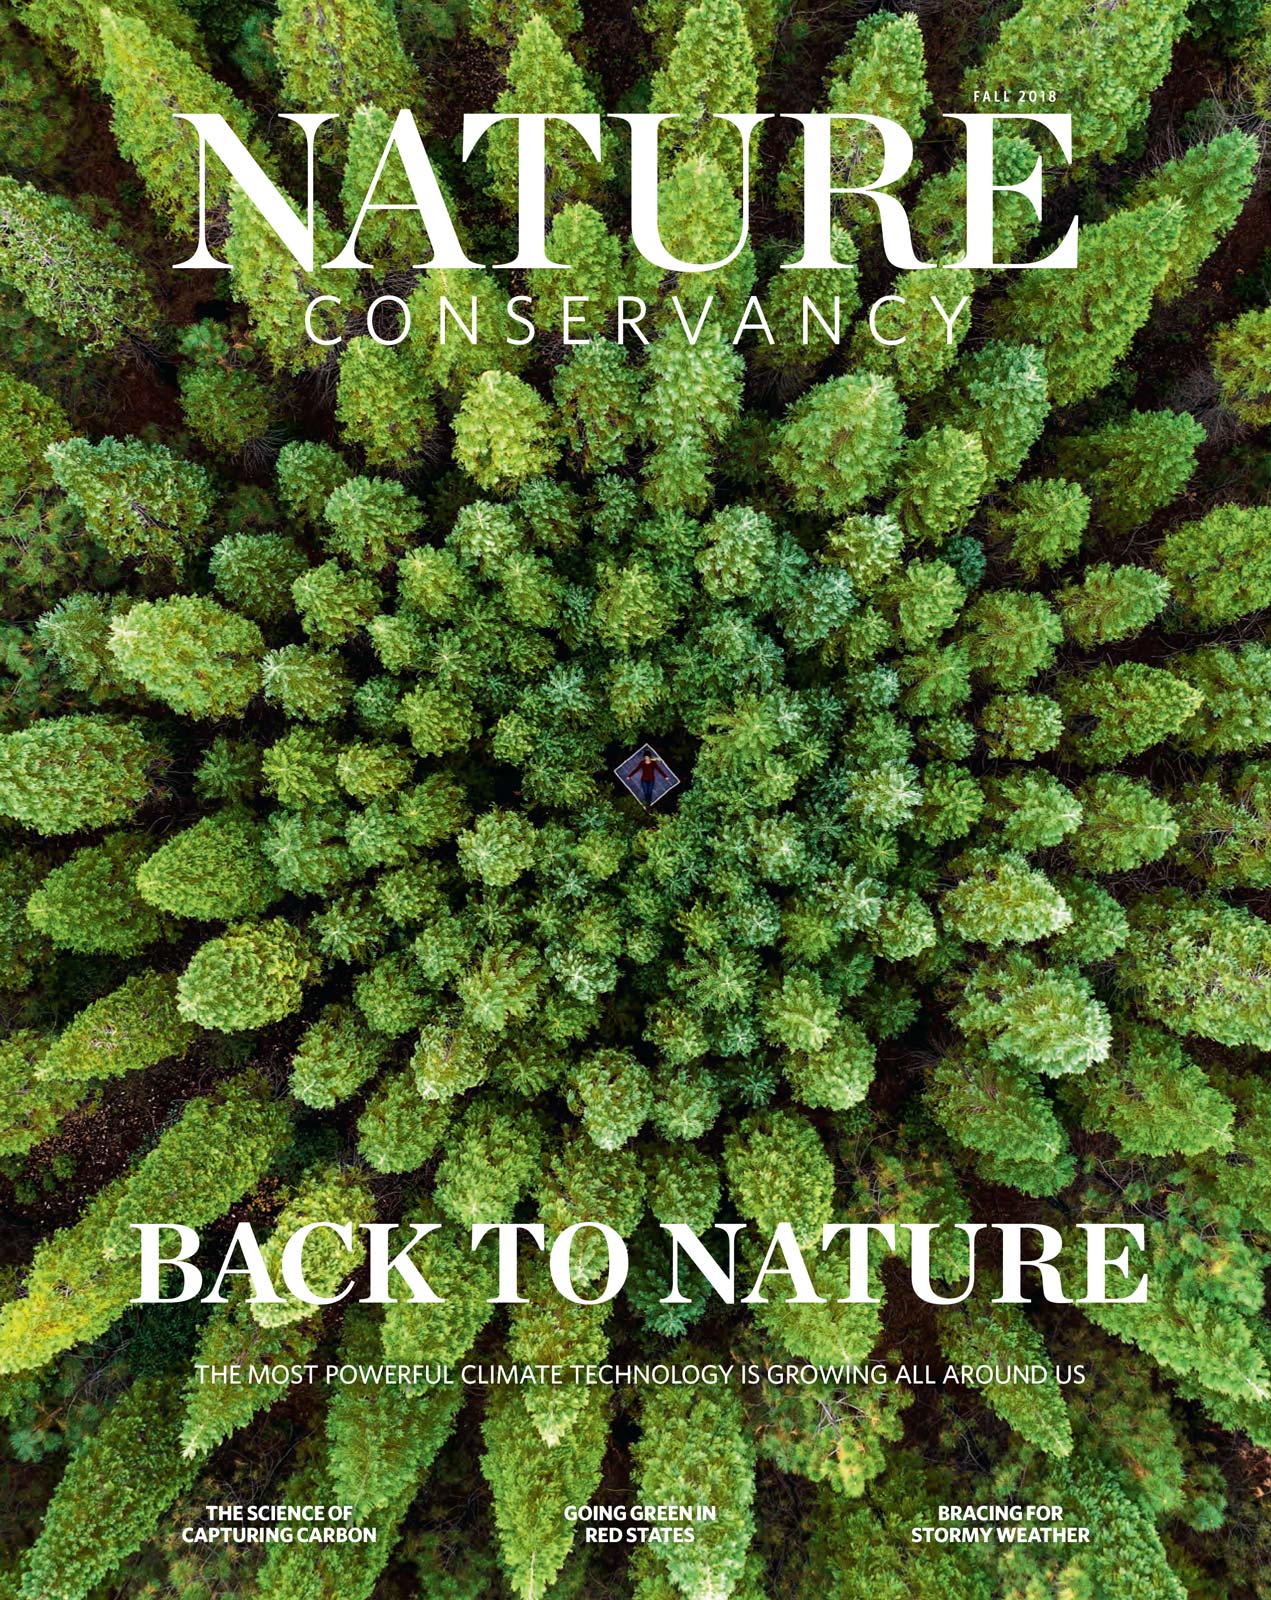 Cover of Nature Conservancy magazine showing a top-down view of a Nelder Plot.